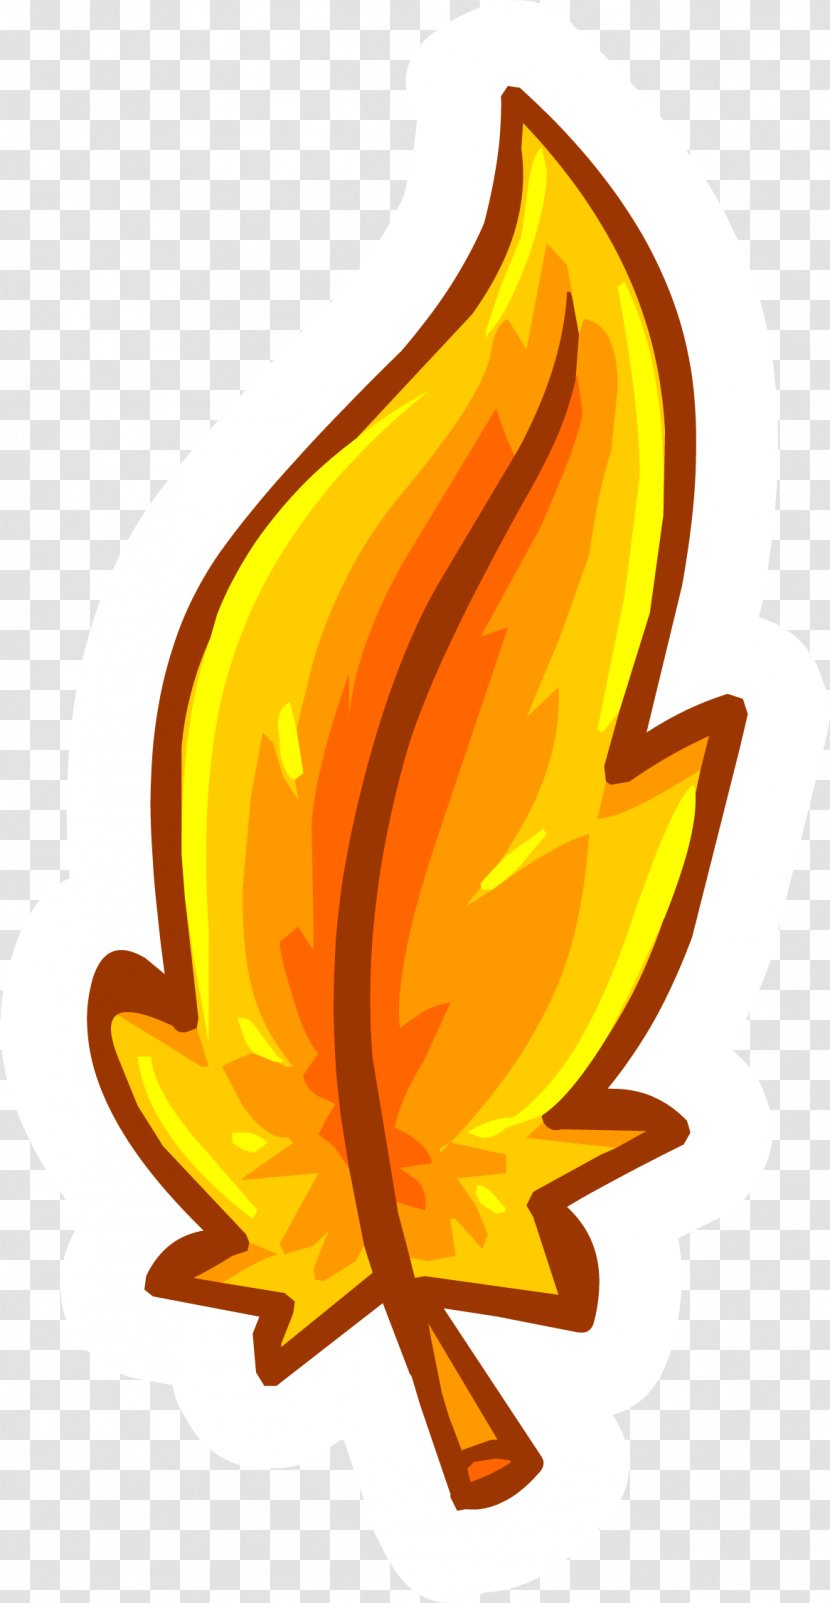 Club Penguin Feather Emoticon Clip Art - Wiki - Feathers Transparent PNG